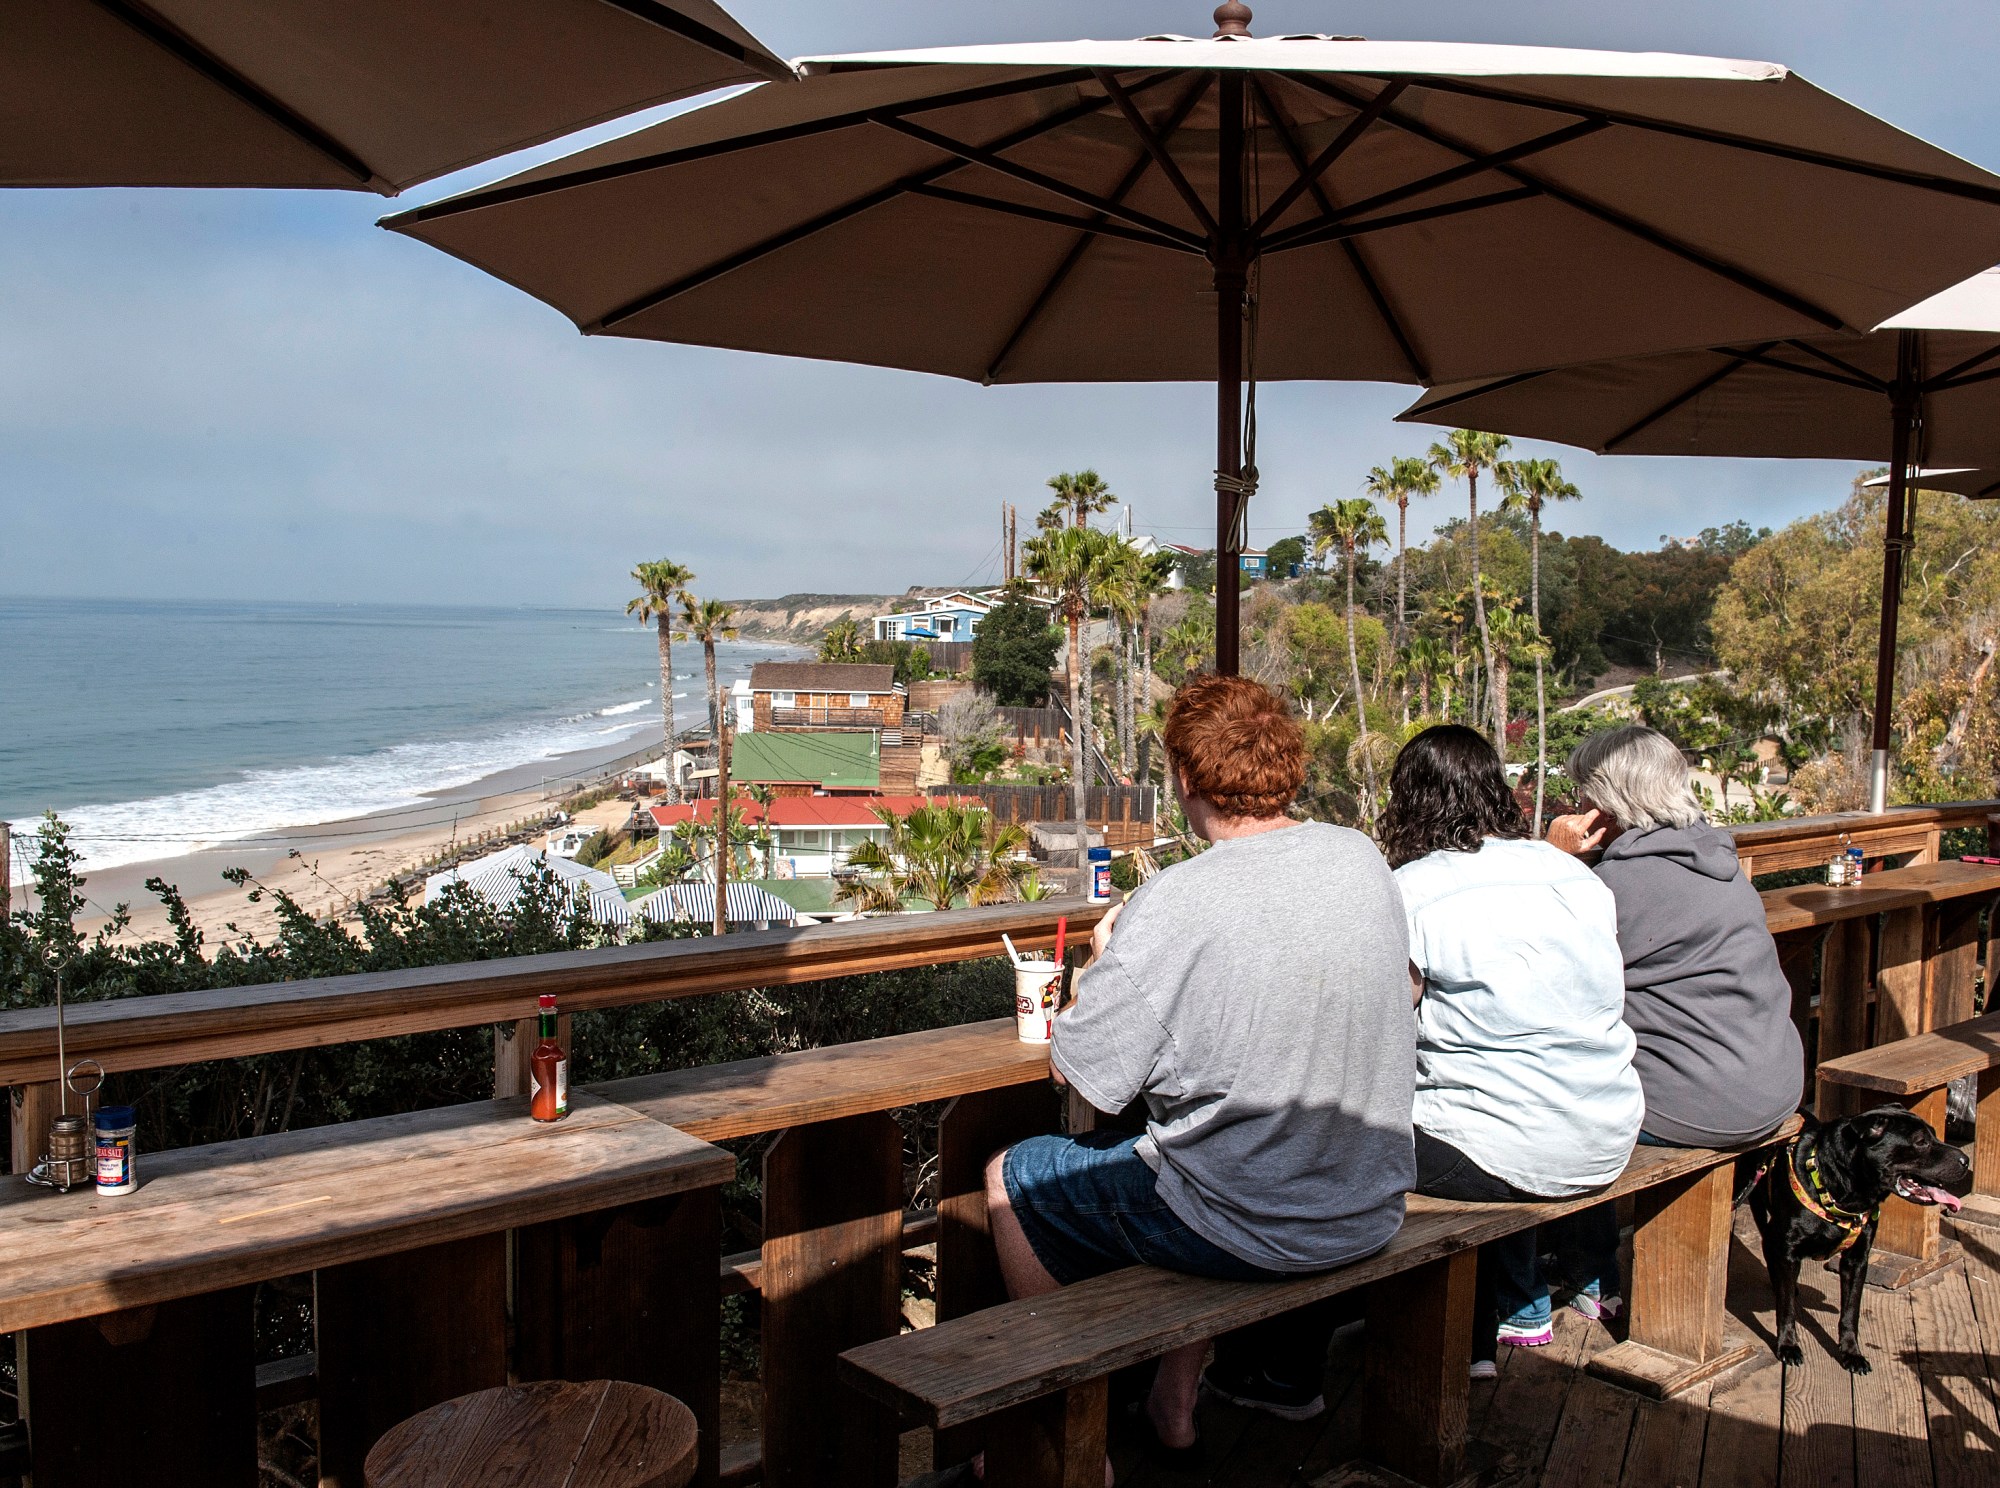 Diners at Ruby's Crystal Cove Shake Shack on Pacific Coast Highway in Newport Beach have a view of the ocean and cottages in Crystal Cove State Park. (Photo by Mark Rightmire, Orange County Register/SCNG)